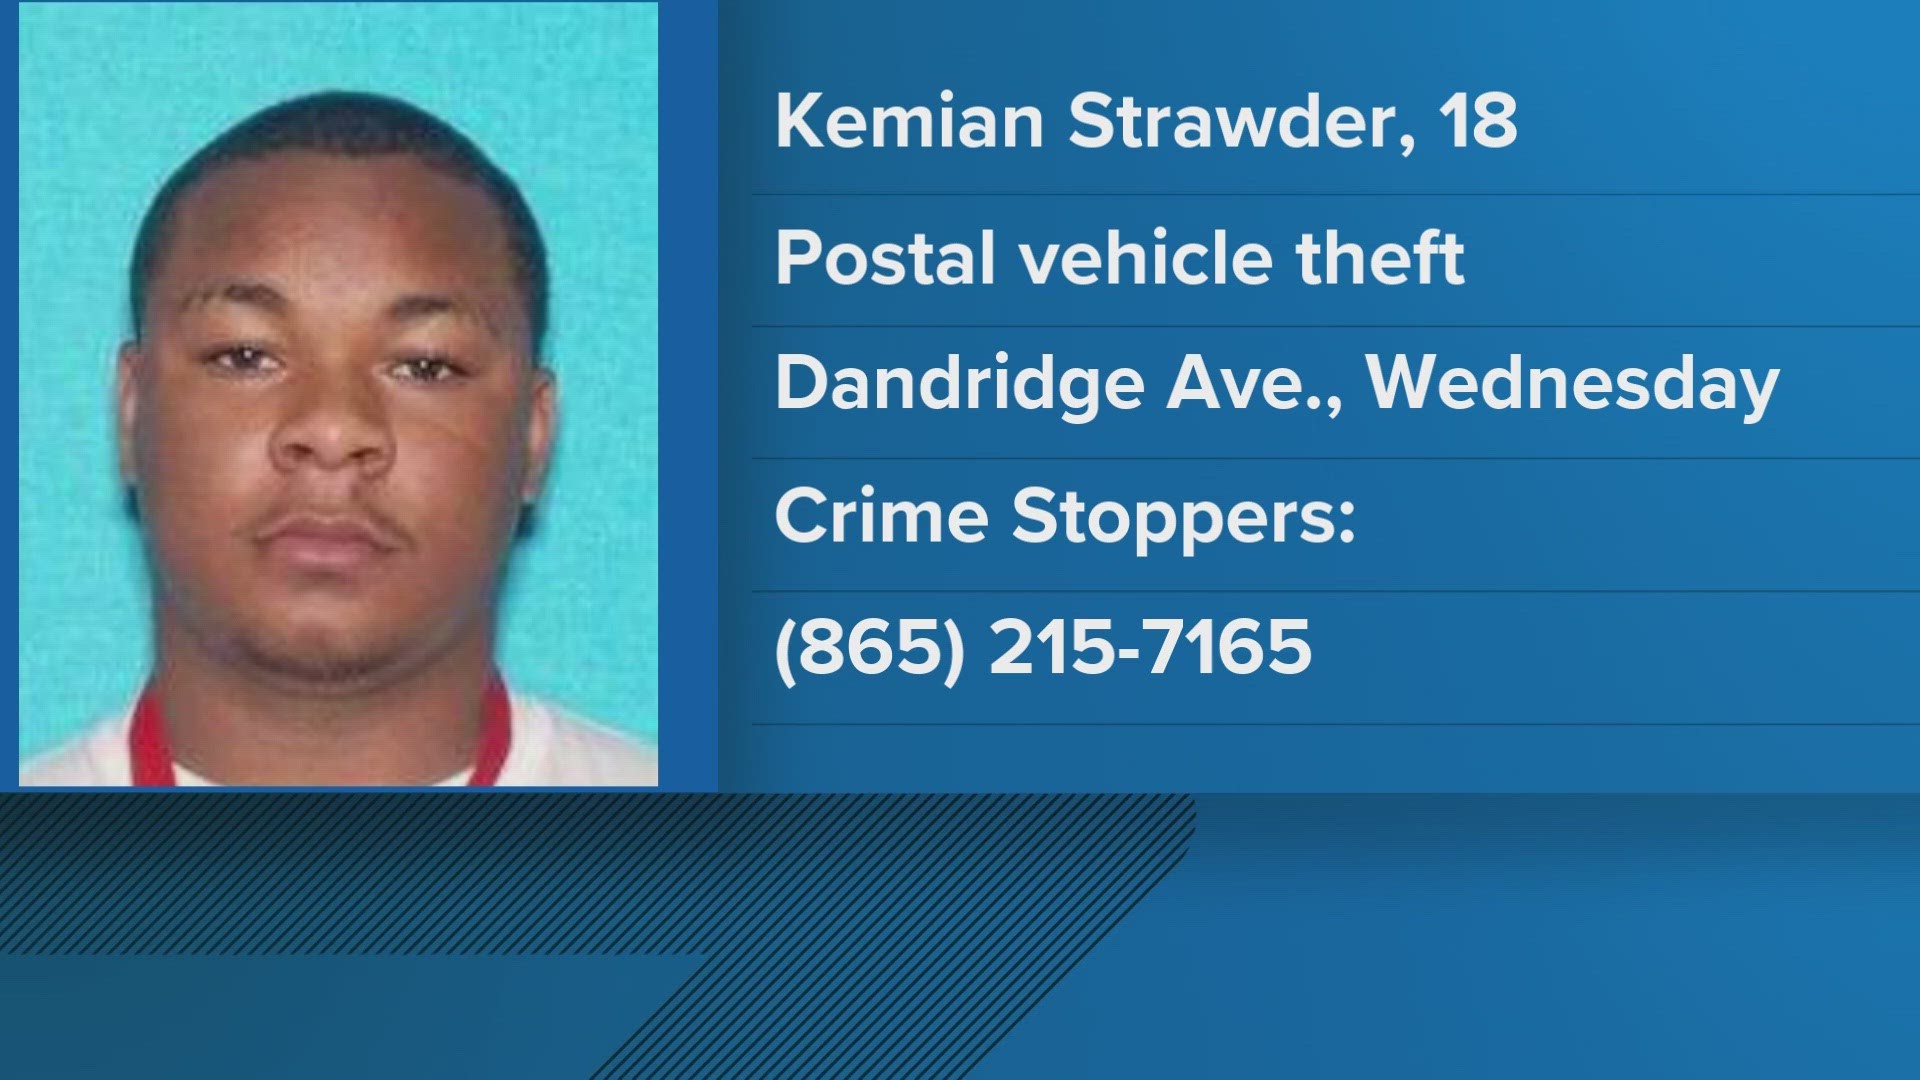 Investigators say they are looking for this man, 18-year-old Kemian Strawder. Police say he and another person carjacked a postal carrier at gunpoint Wednesday.